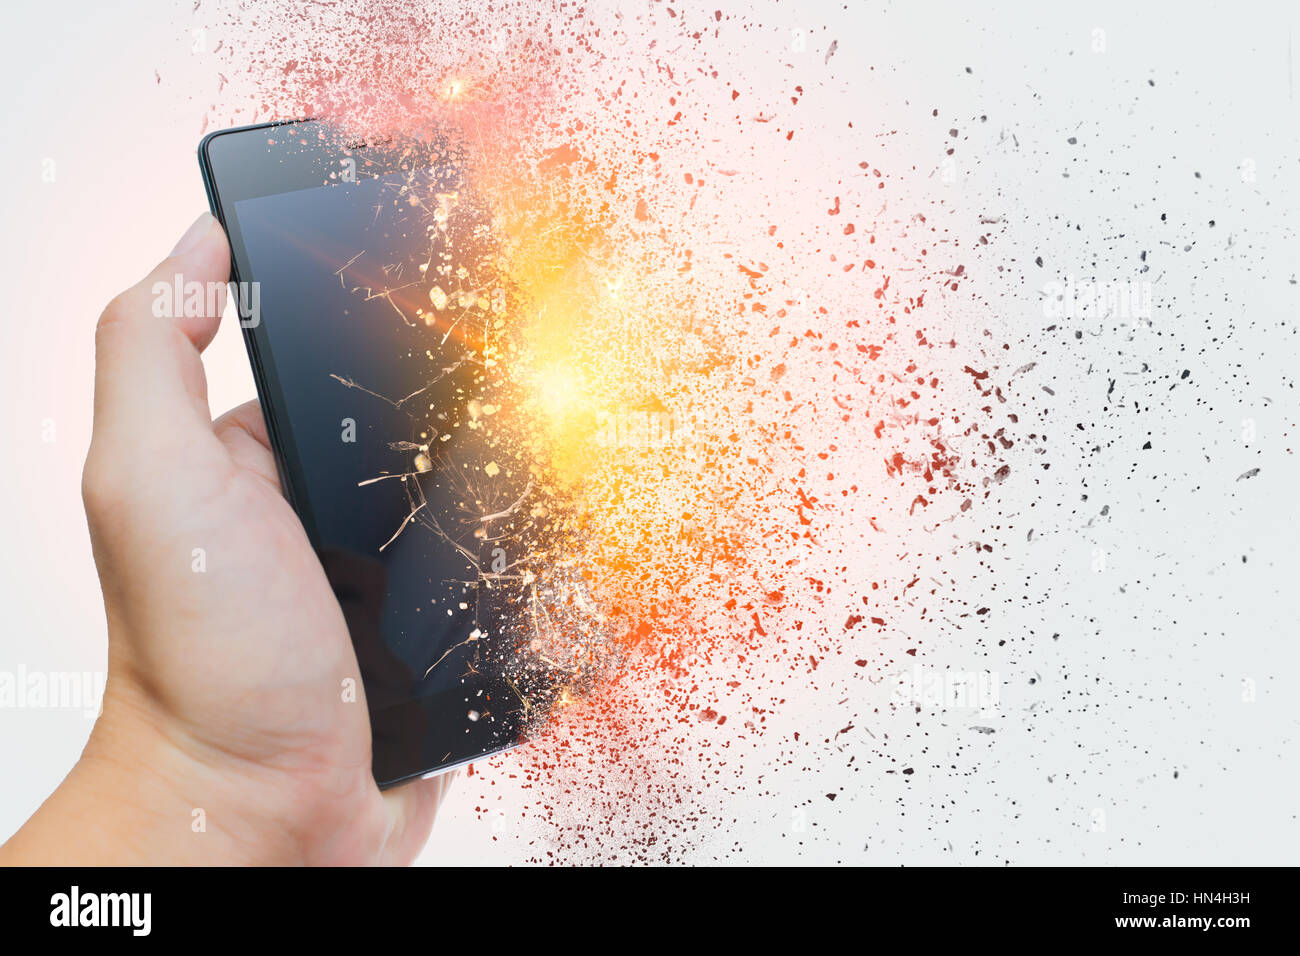 smartphone explosion, blow up cellphone battery or explosive mobile phone or explode burst fire burn out smart device with dispersion effect. Stock Photo